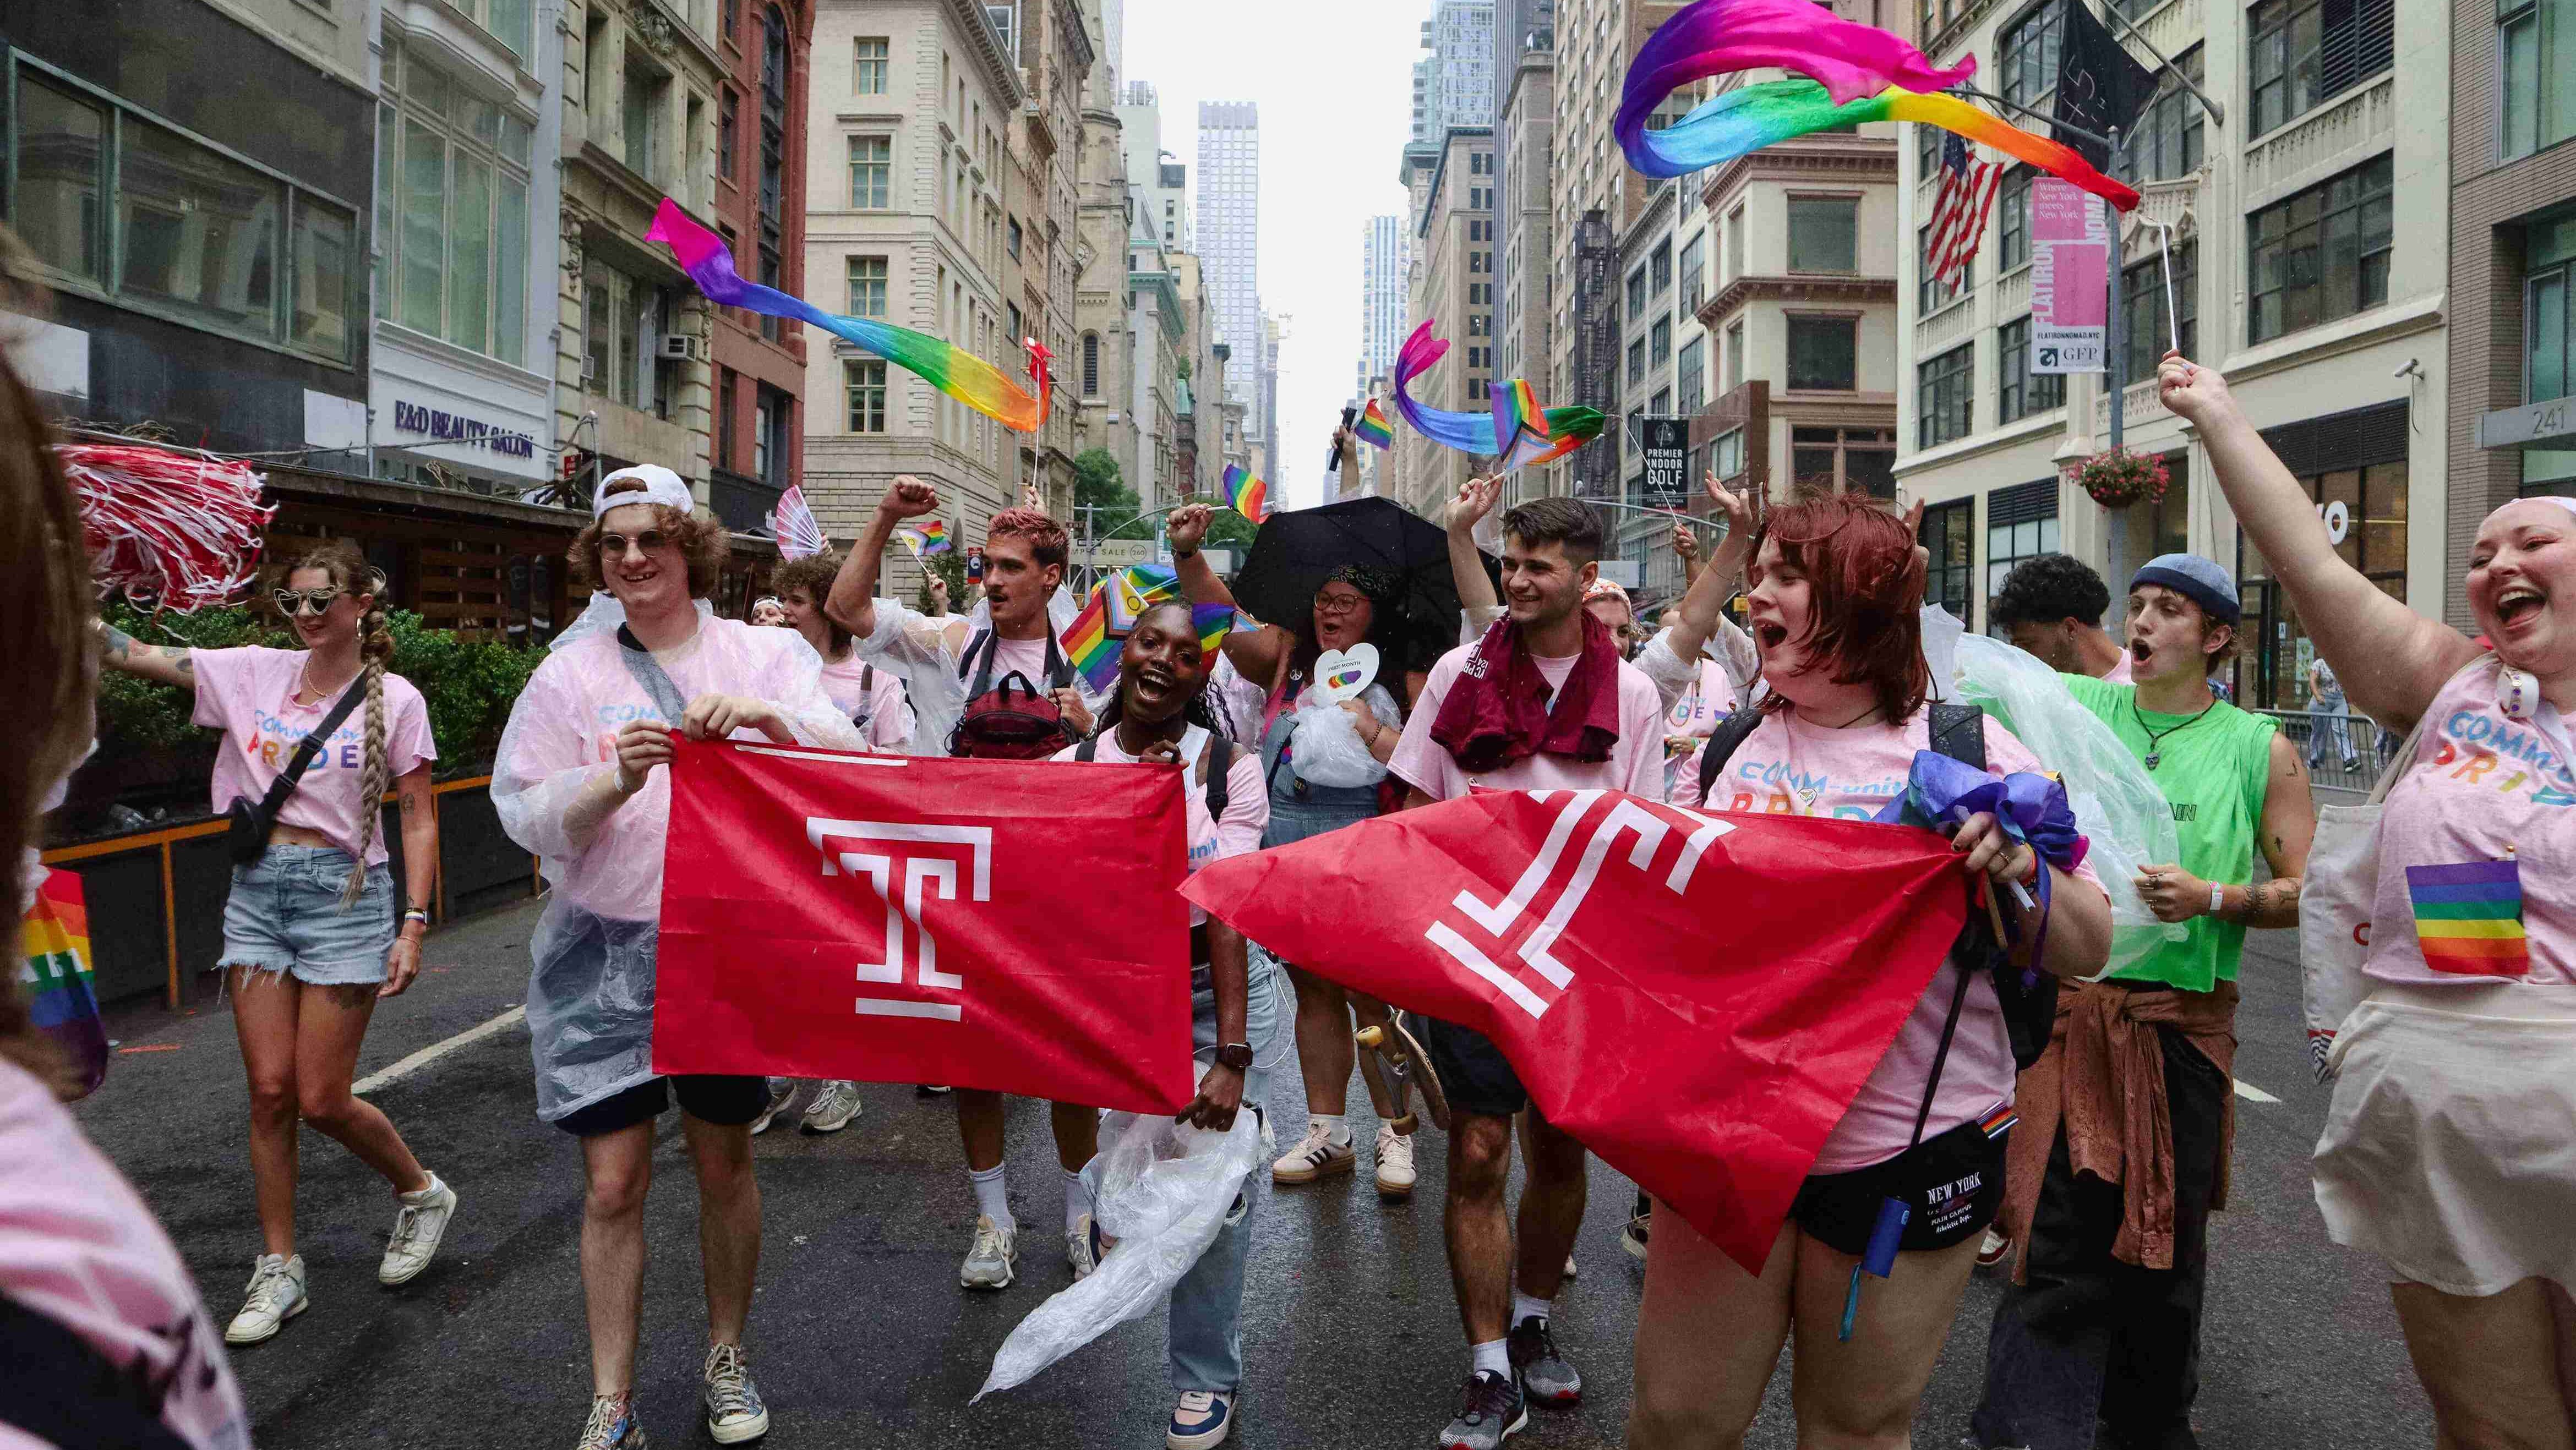 Students holding Temple flags at NYC Pride